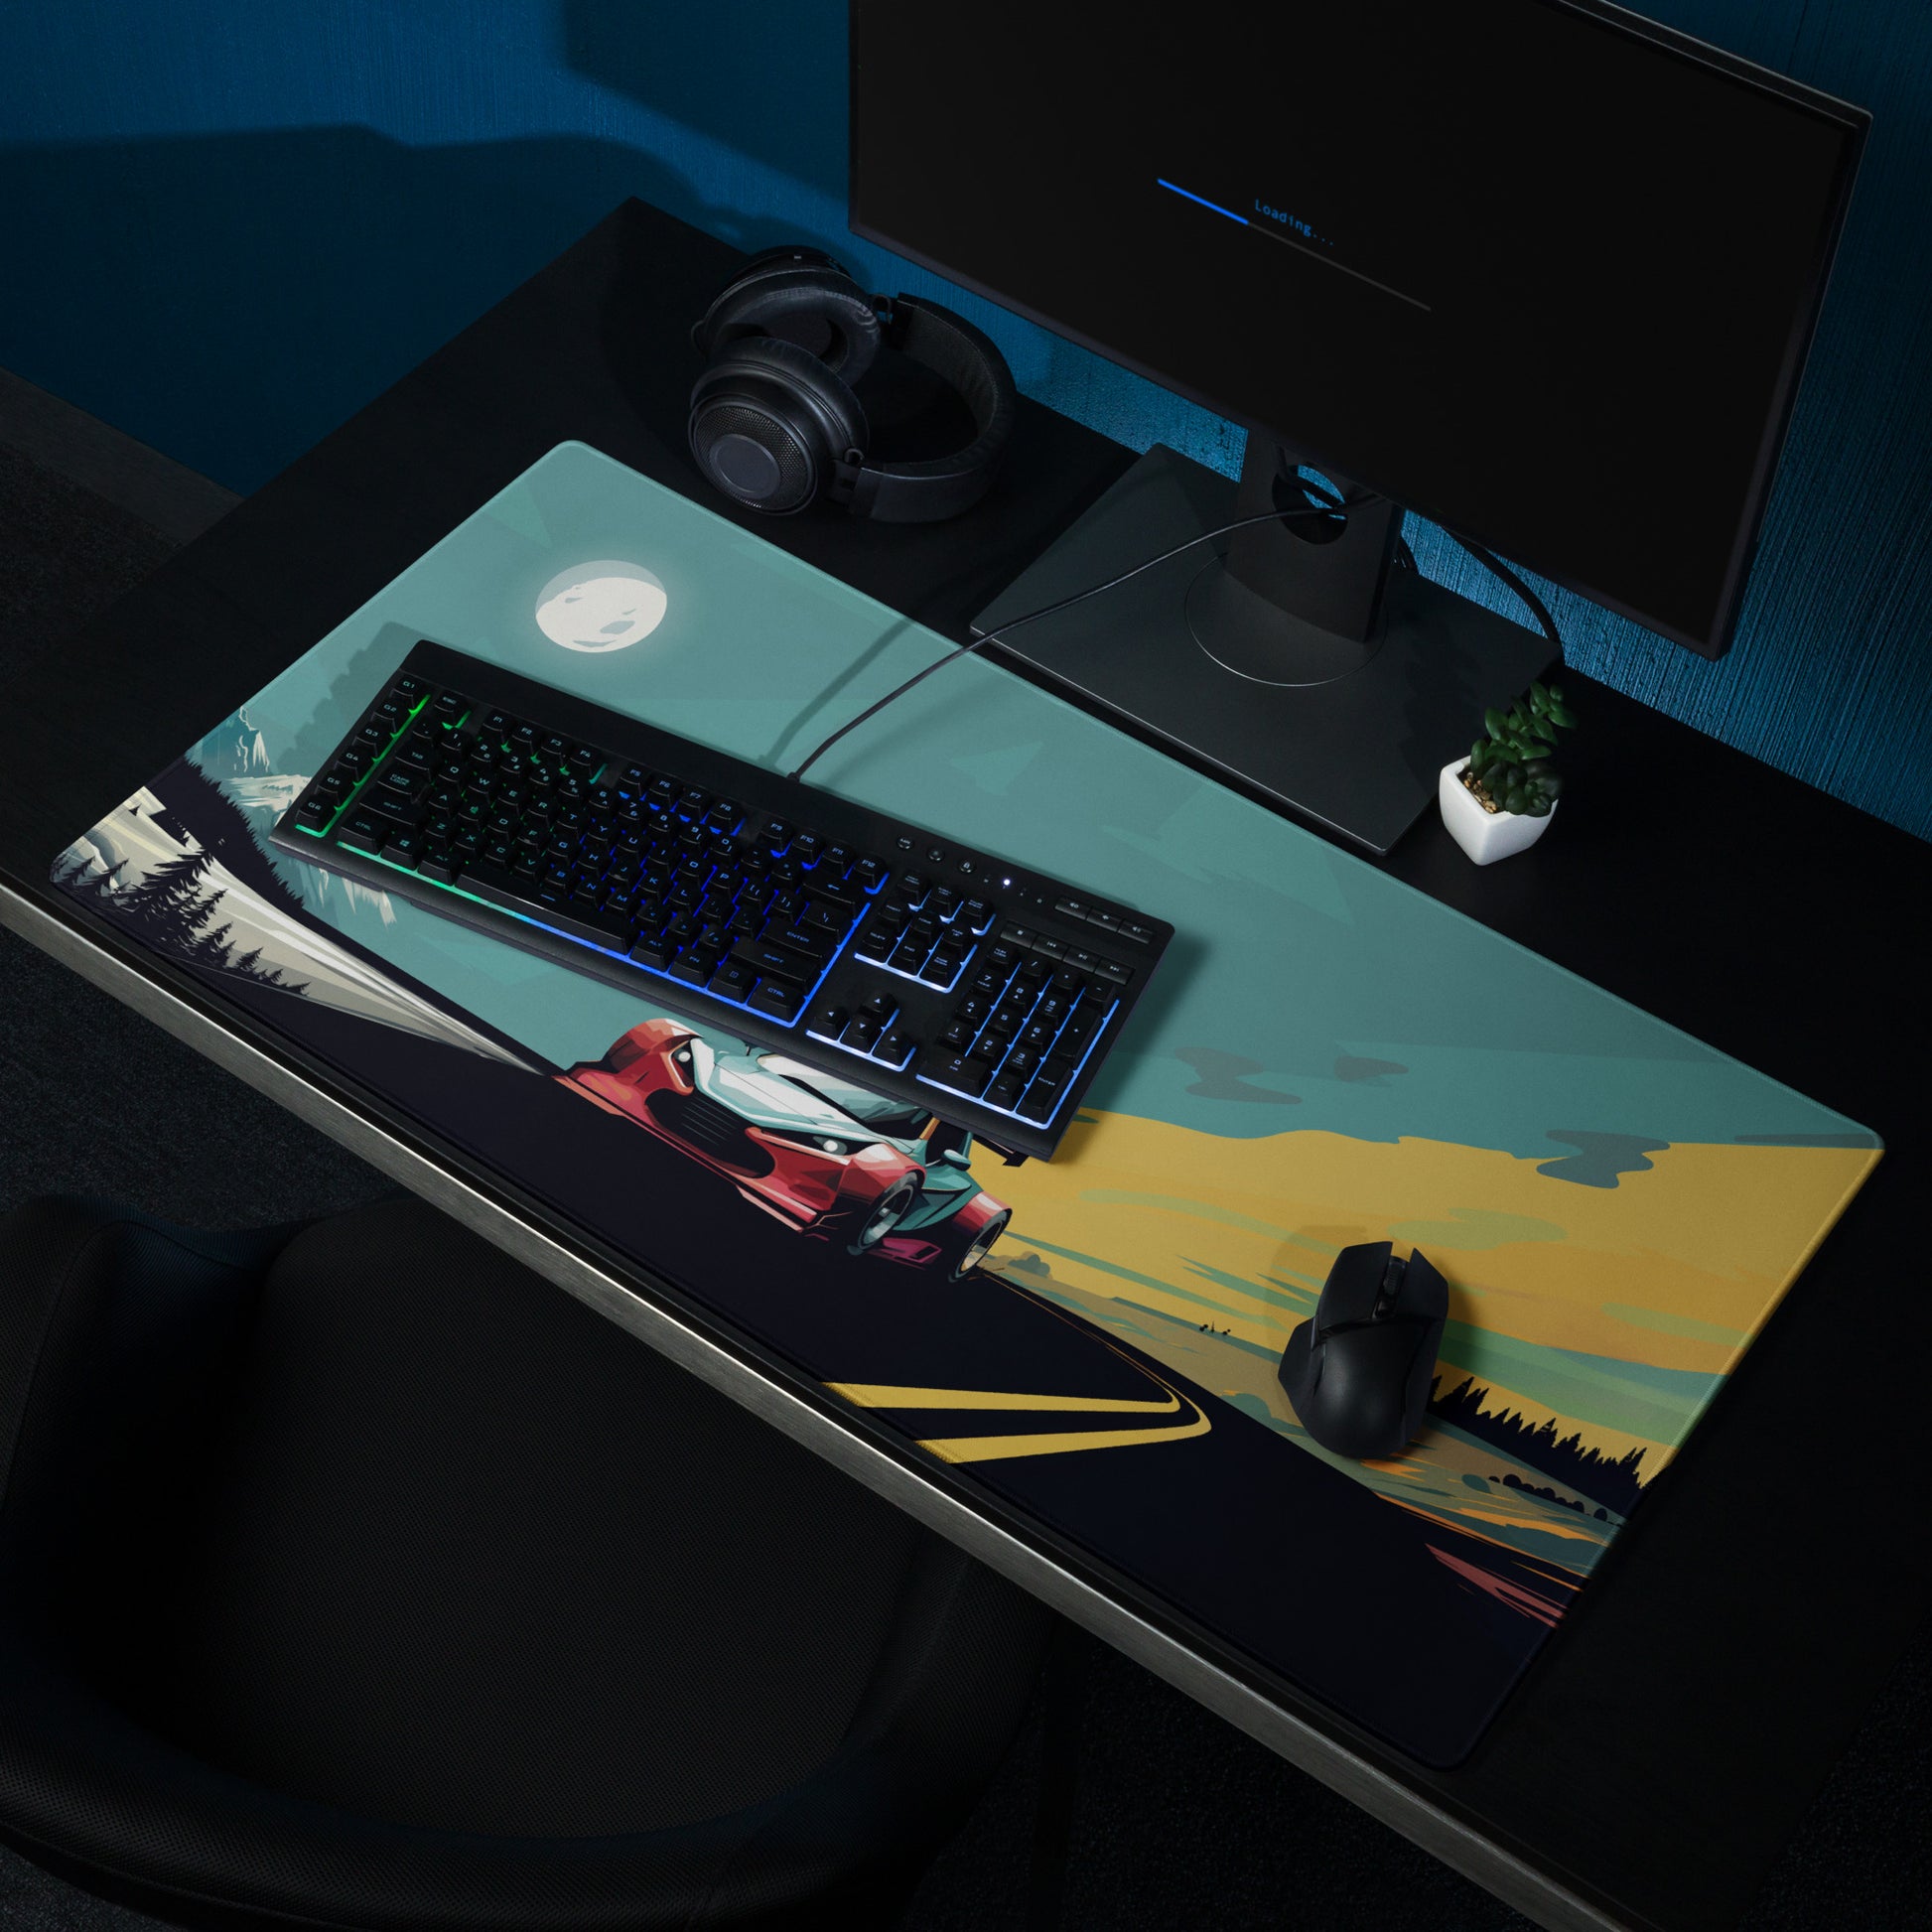 A 36" x 18" gaming desk pad with a futuristic GT car racing through the mountains shown on a desk setup. Blue and Grey in color.